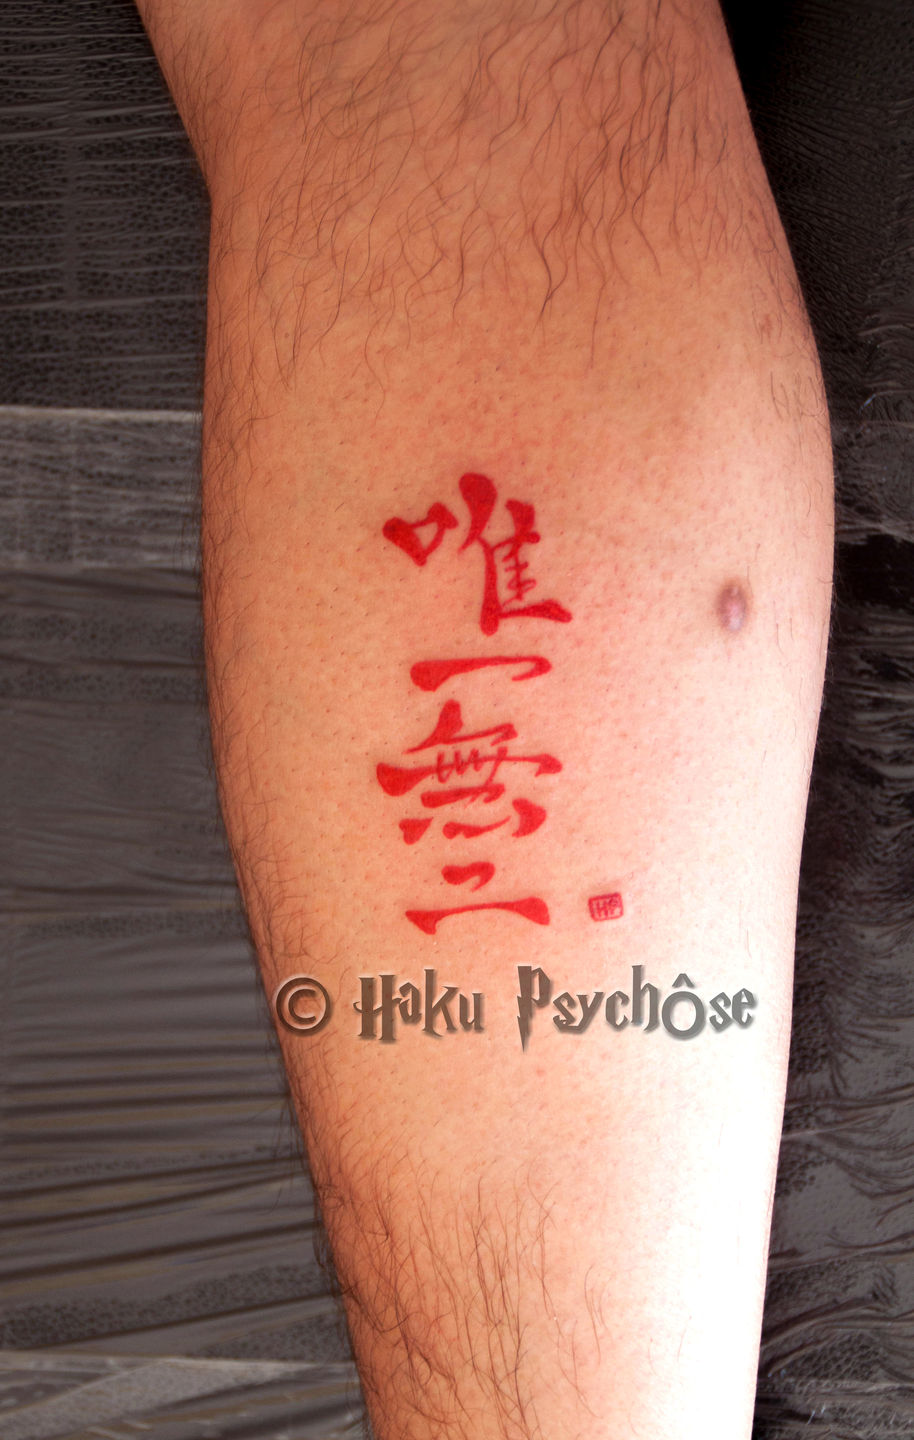 Japanese inspired tattoos for your next ink project on your body